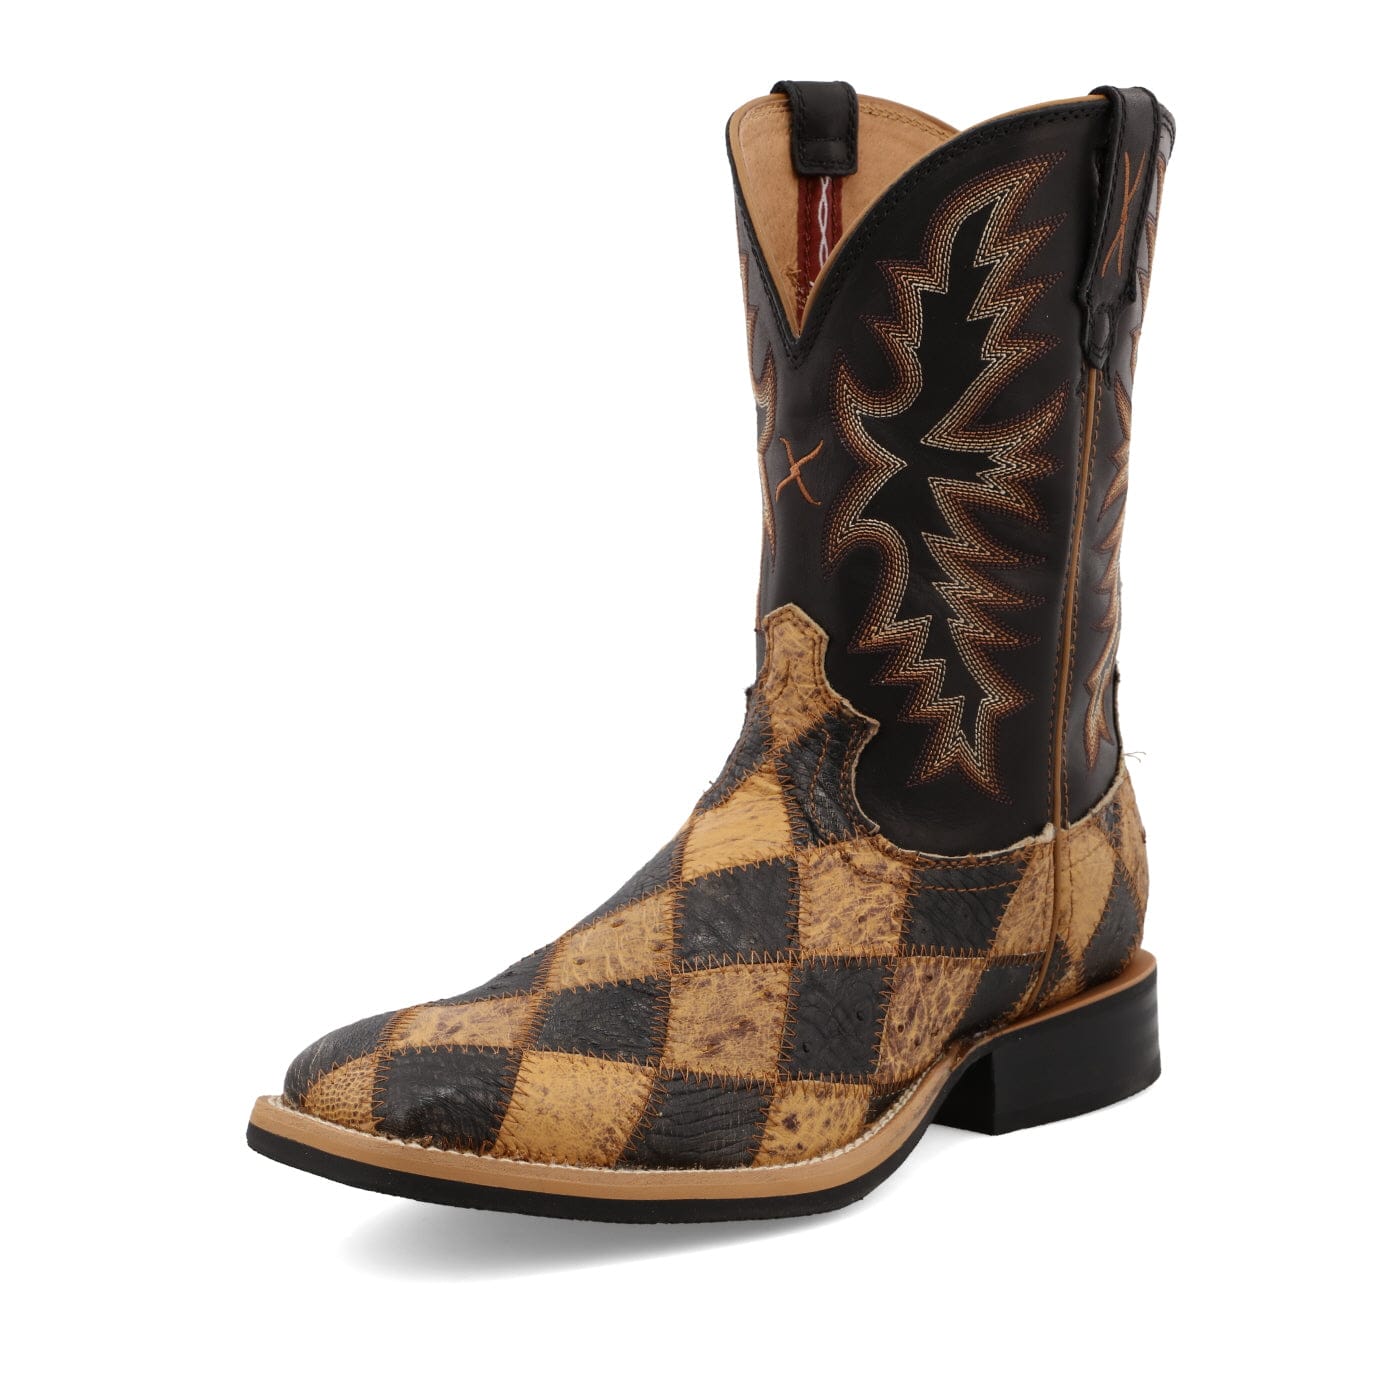 Twisted x Men's Ruff Stock Western Boots - Broad Square Toe